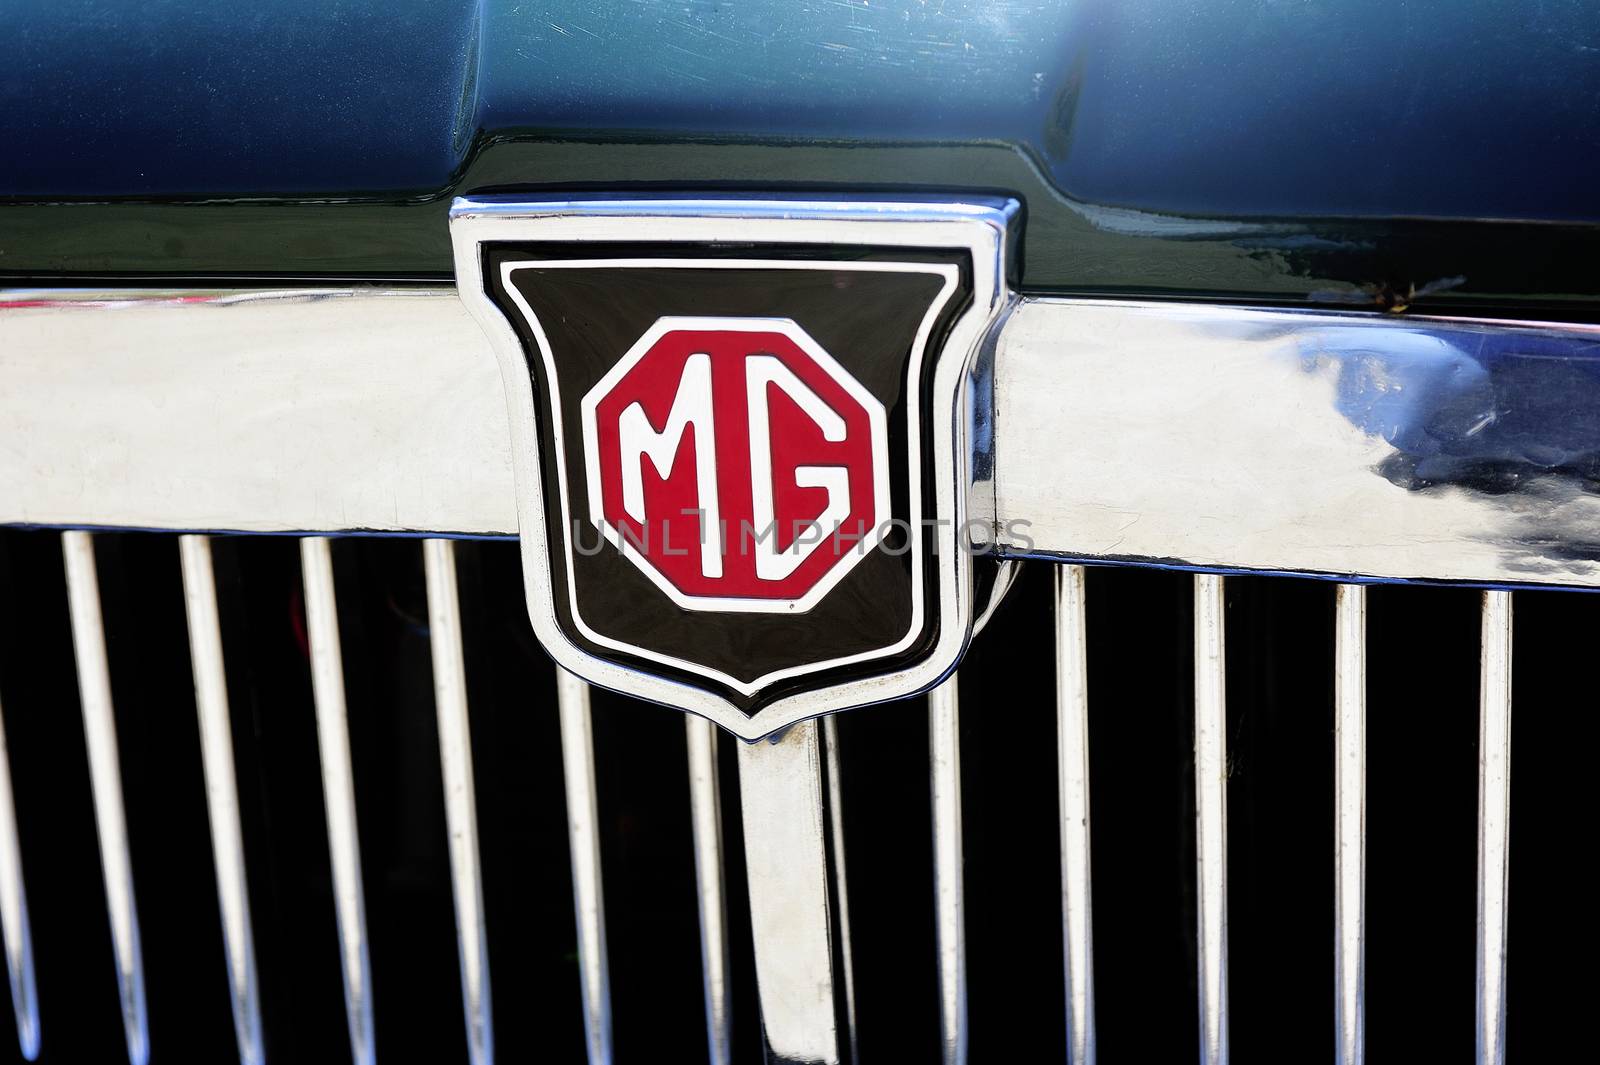 Detail of the MG brand on an old car radiator photographed vintage car rally Town Hall Square in the town of Ales, in the Gard department